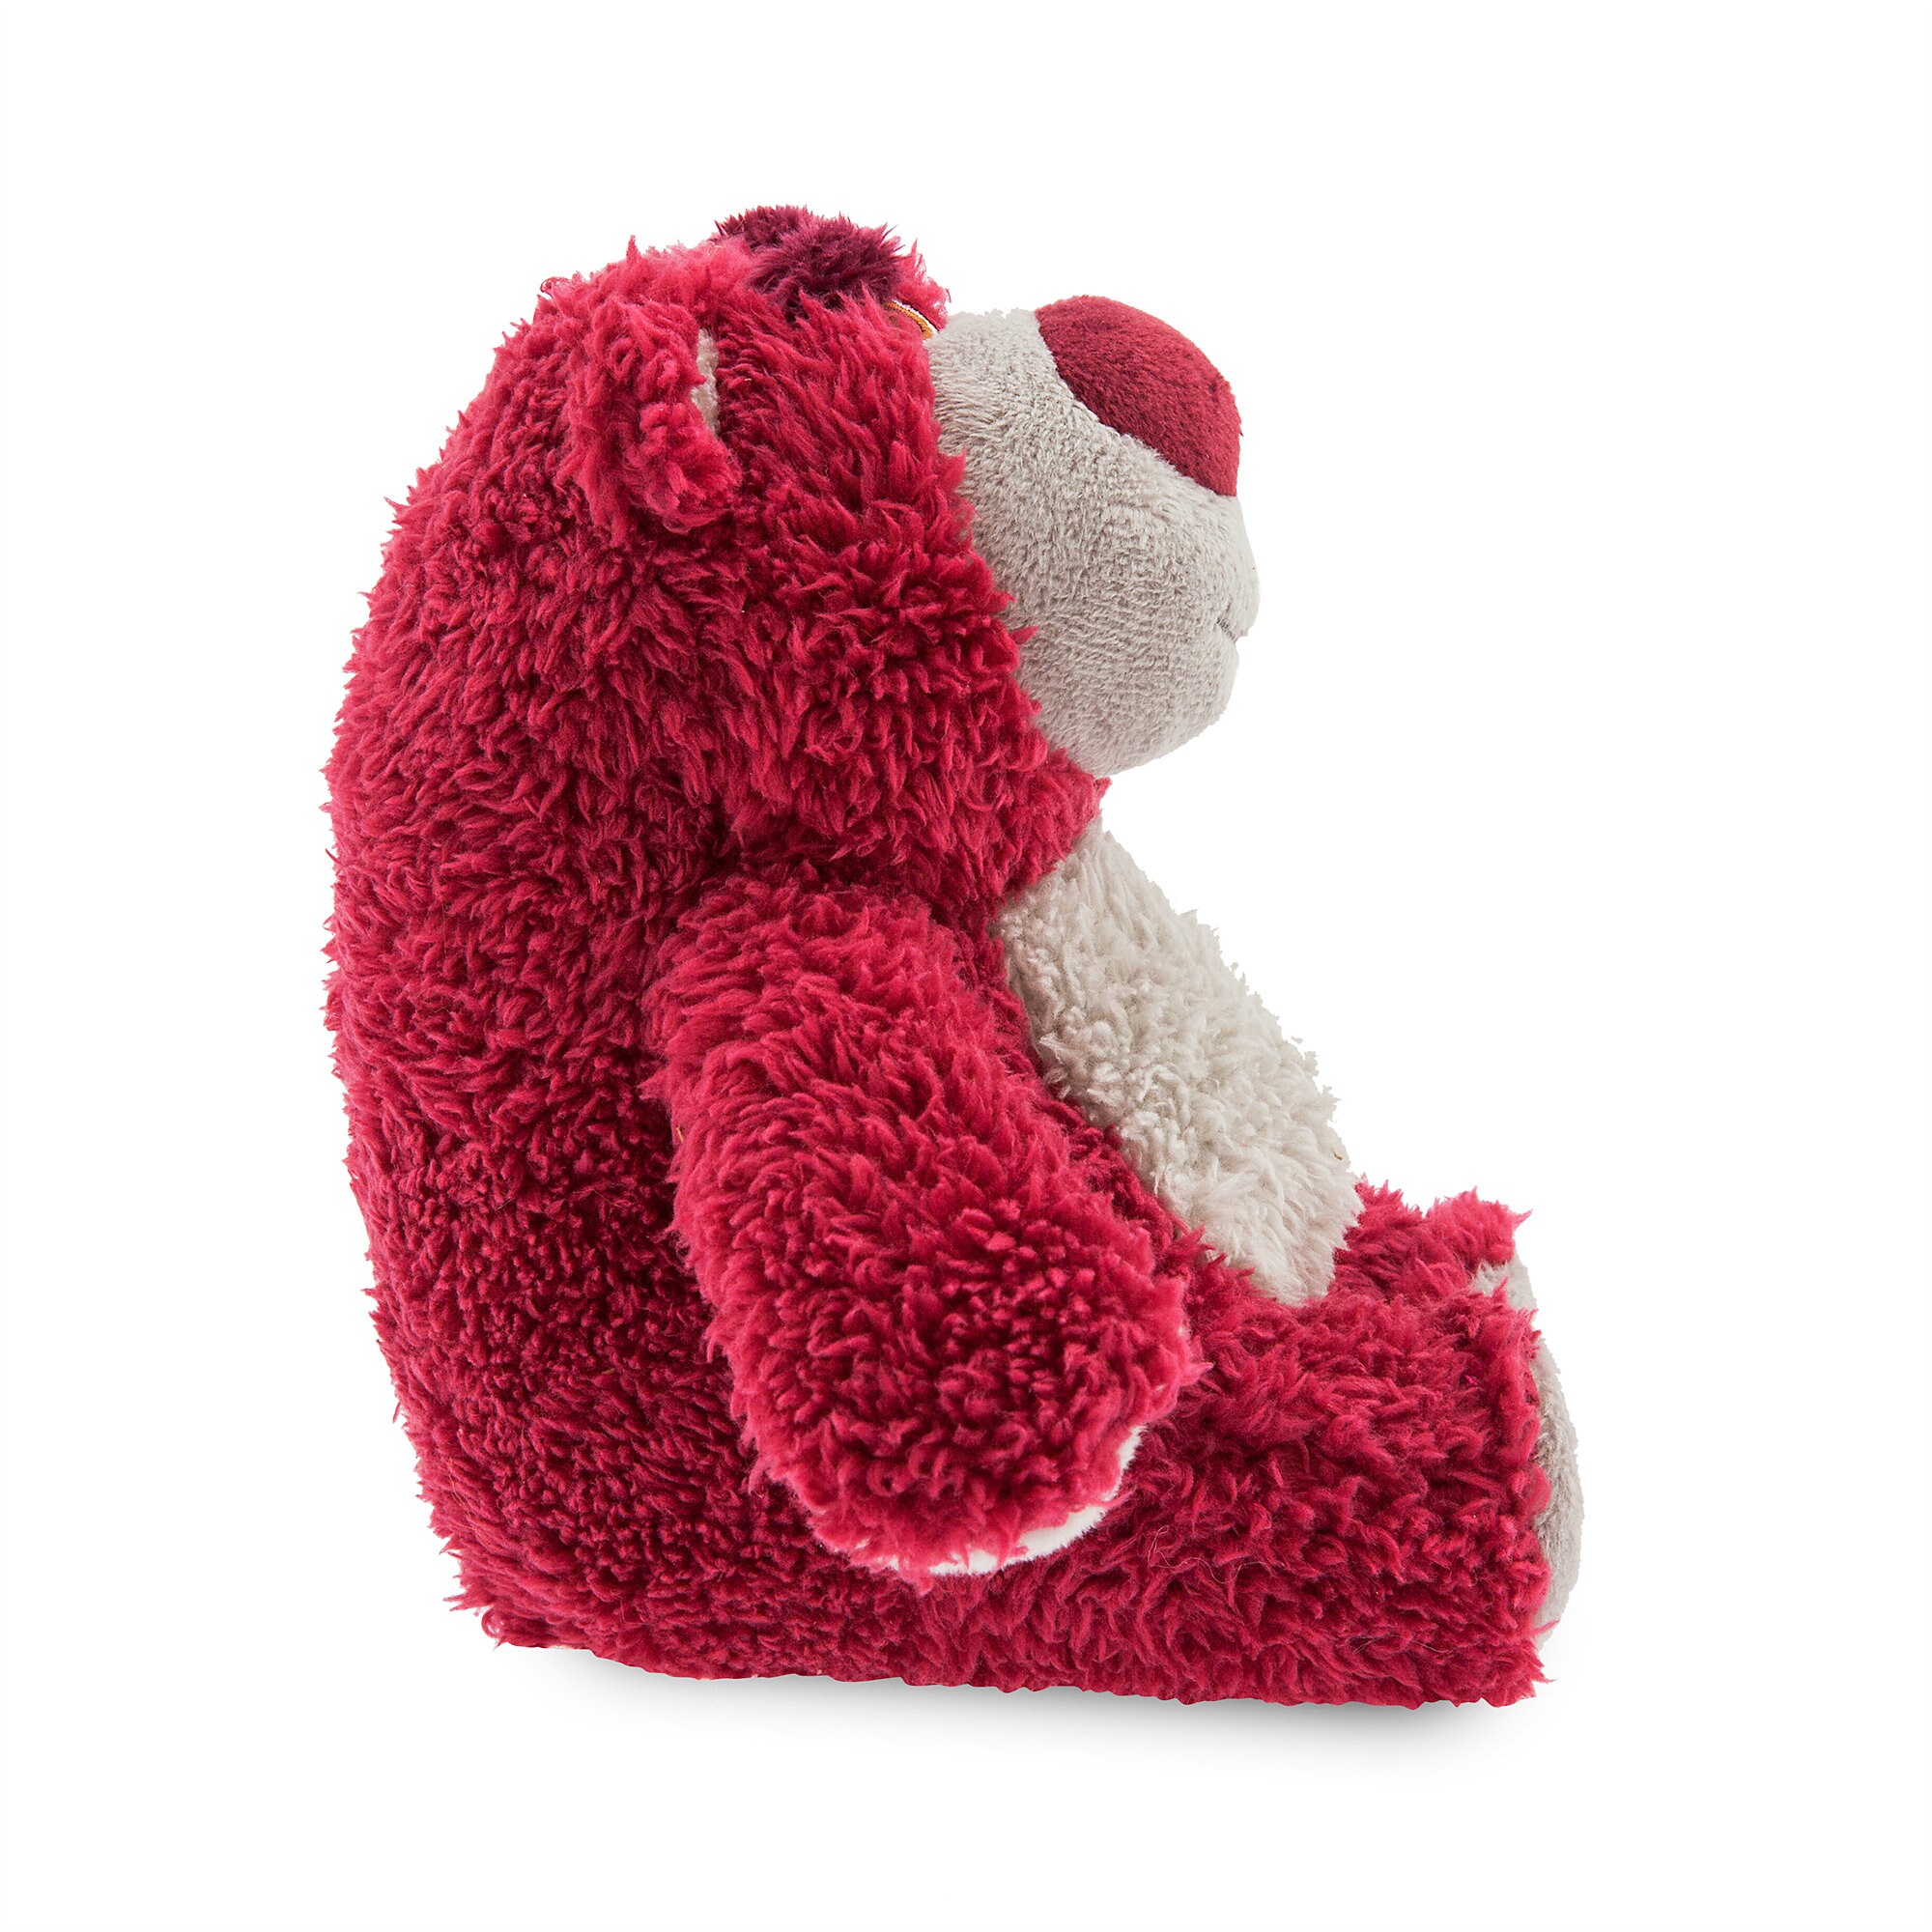 Lotso Scented Plush - Toy Story - Mini Bean Bag - 7'' - Personalized